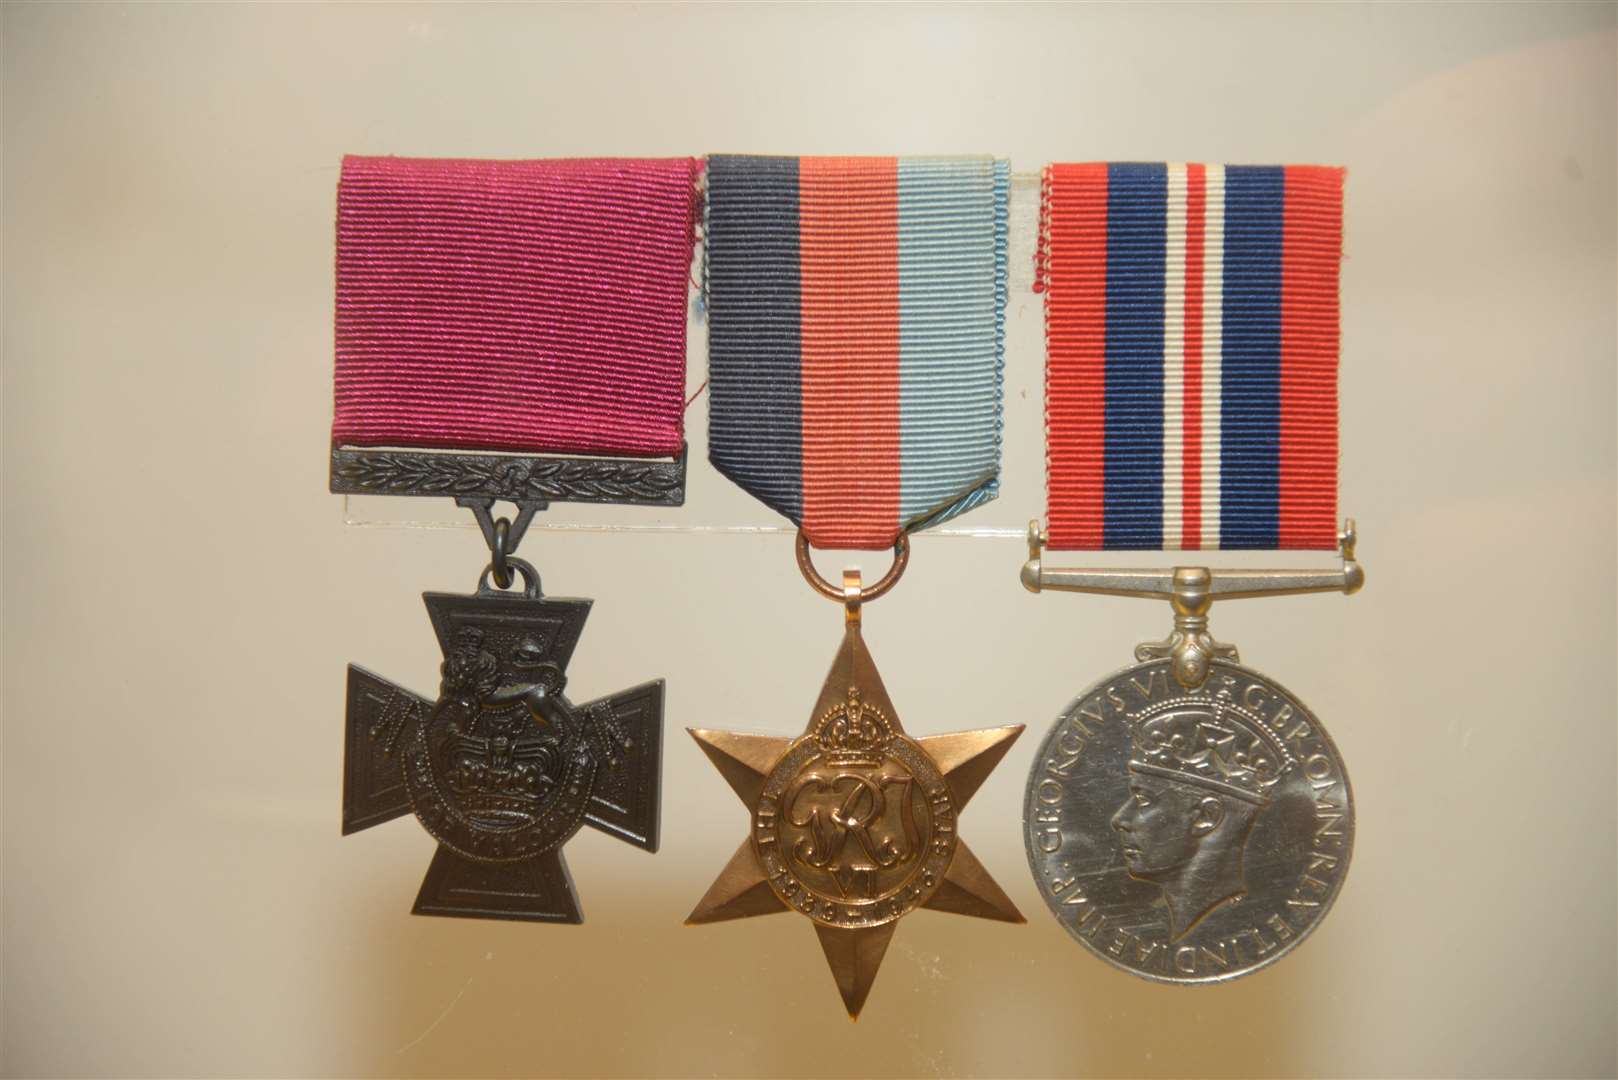 Sgt Thomas Durrant's medals with the Victoria Cross on the left on display in the Royal Engineers Museum. Picture:Chris Davey